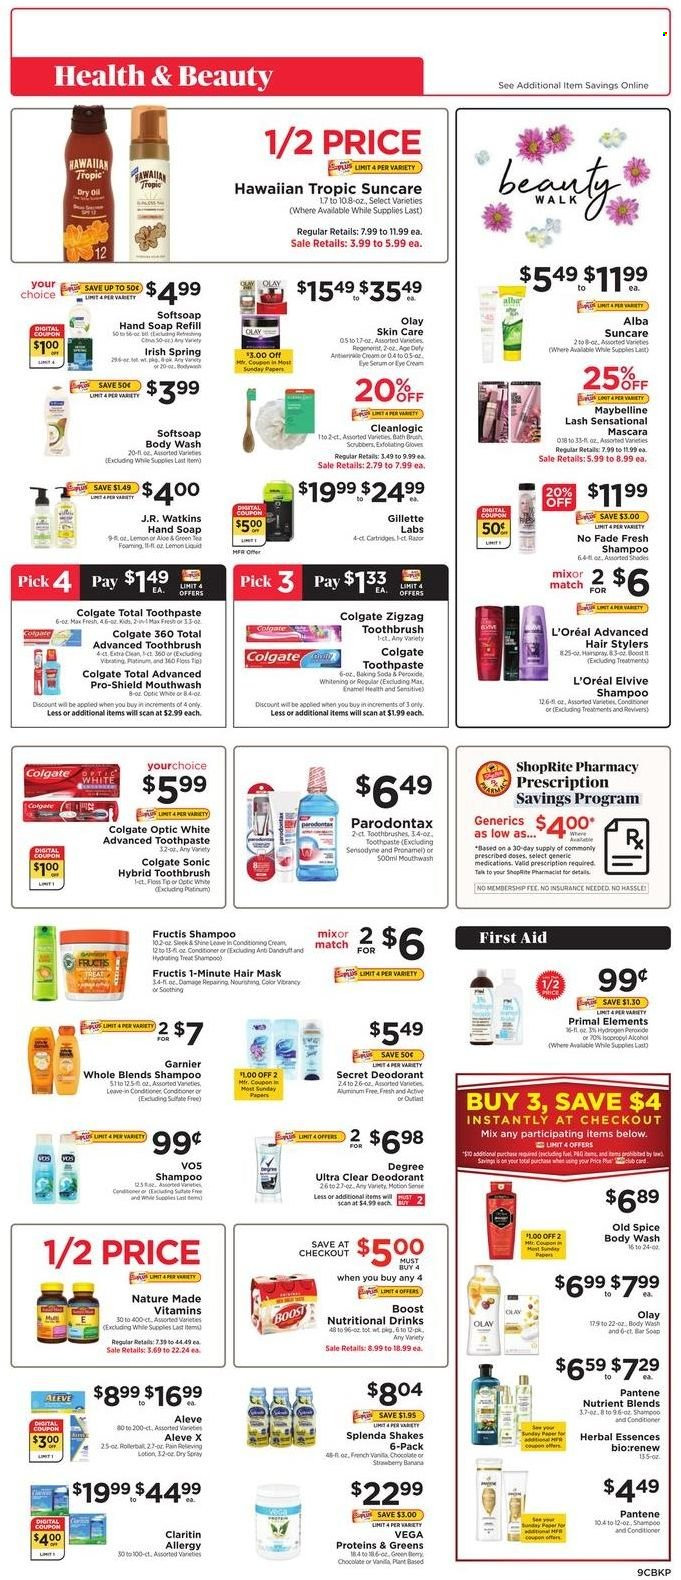 thumbnail - ShopRite Flyer - 05/29/2022 - 06/04/2022 - Sales products - shake, chocolate, Orbit, spice, oil, Boost, body wash, shampoo, Softsoap, hand soap, Old Spice, soap bar, soap, Colgate, toothbrush, toothpaste, Sensodyne, mouthwash, Garnier, L’Oréal, serum, Olay, eye cream, conditioner, Pantene, hair mask, Herbal Essences, VO5, Fructis, body lotion, anti-perspirant, deodorant, Gillette, gloves, paper, Primal, Aleve, Nature Made. Page 9.